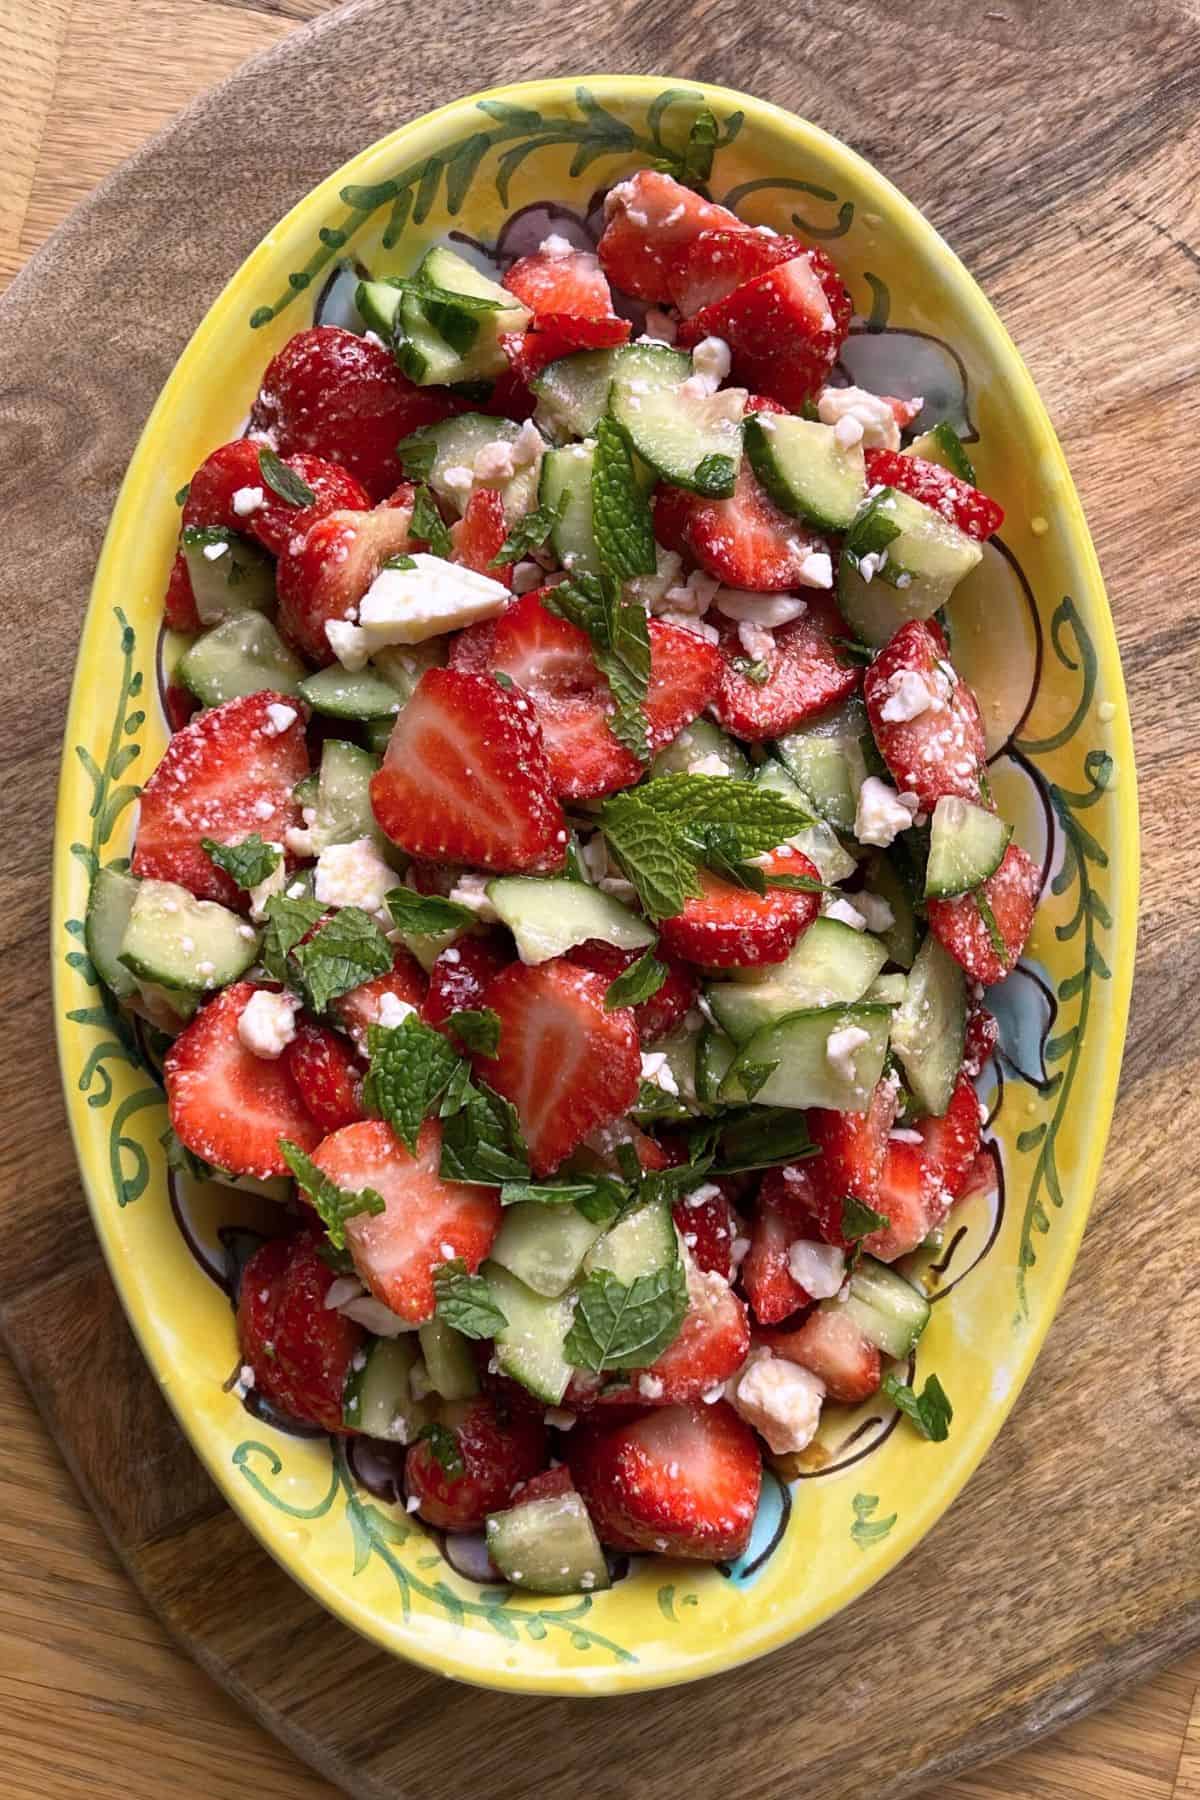 Strawberry salad in a painted oval plate.